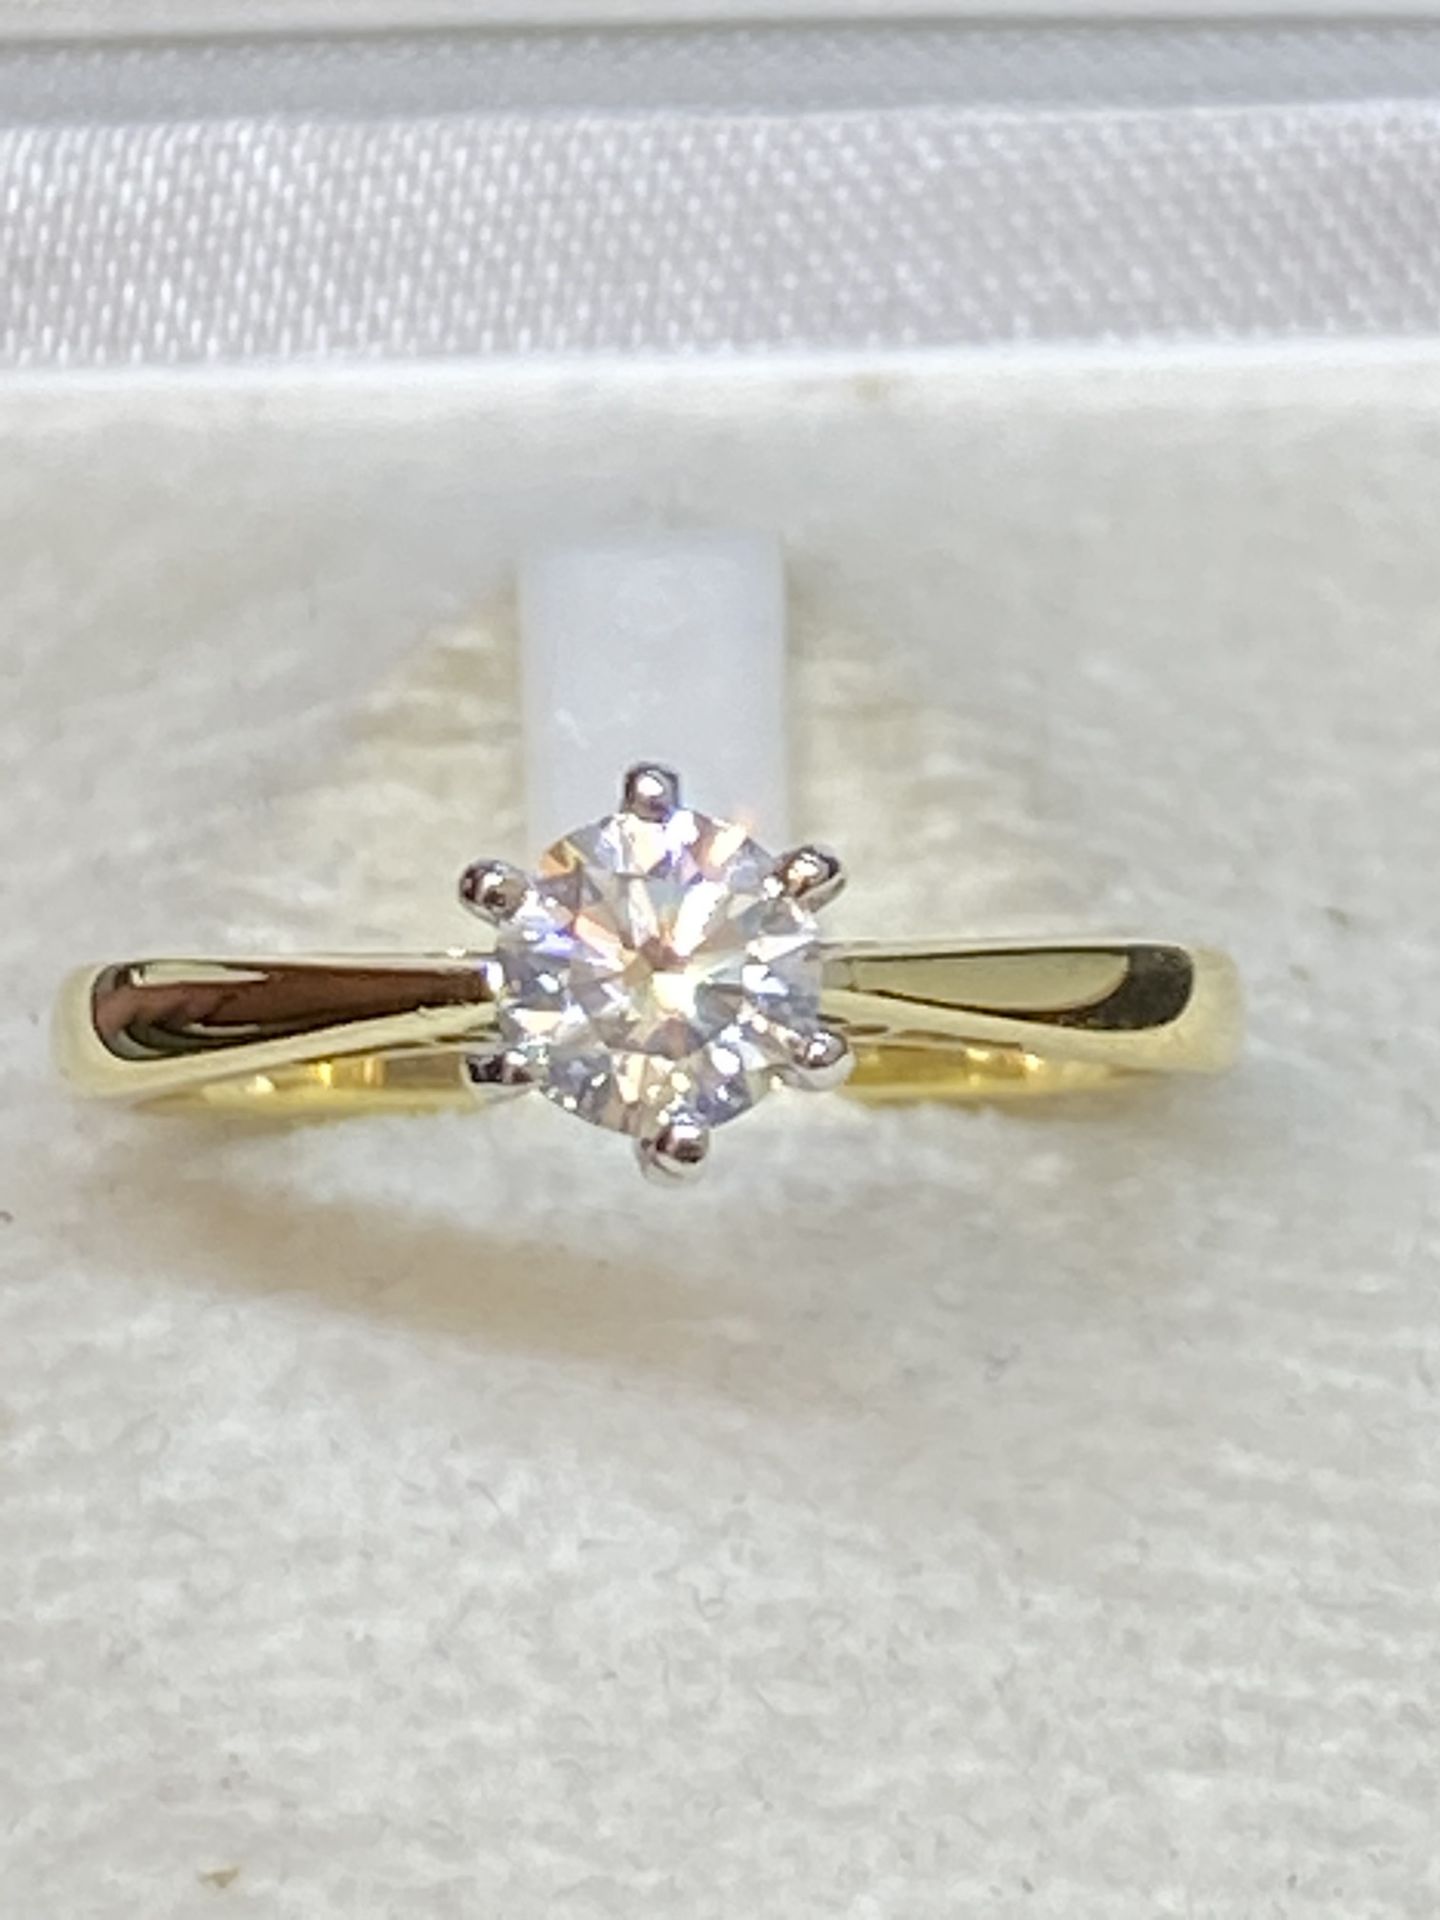 18ct GOLD 0.45ct G/VS DIAMOND SOLITAIRE RING - Image 3 of 5